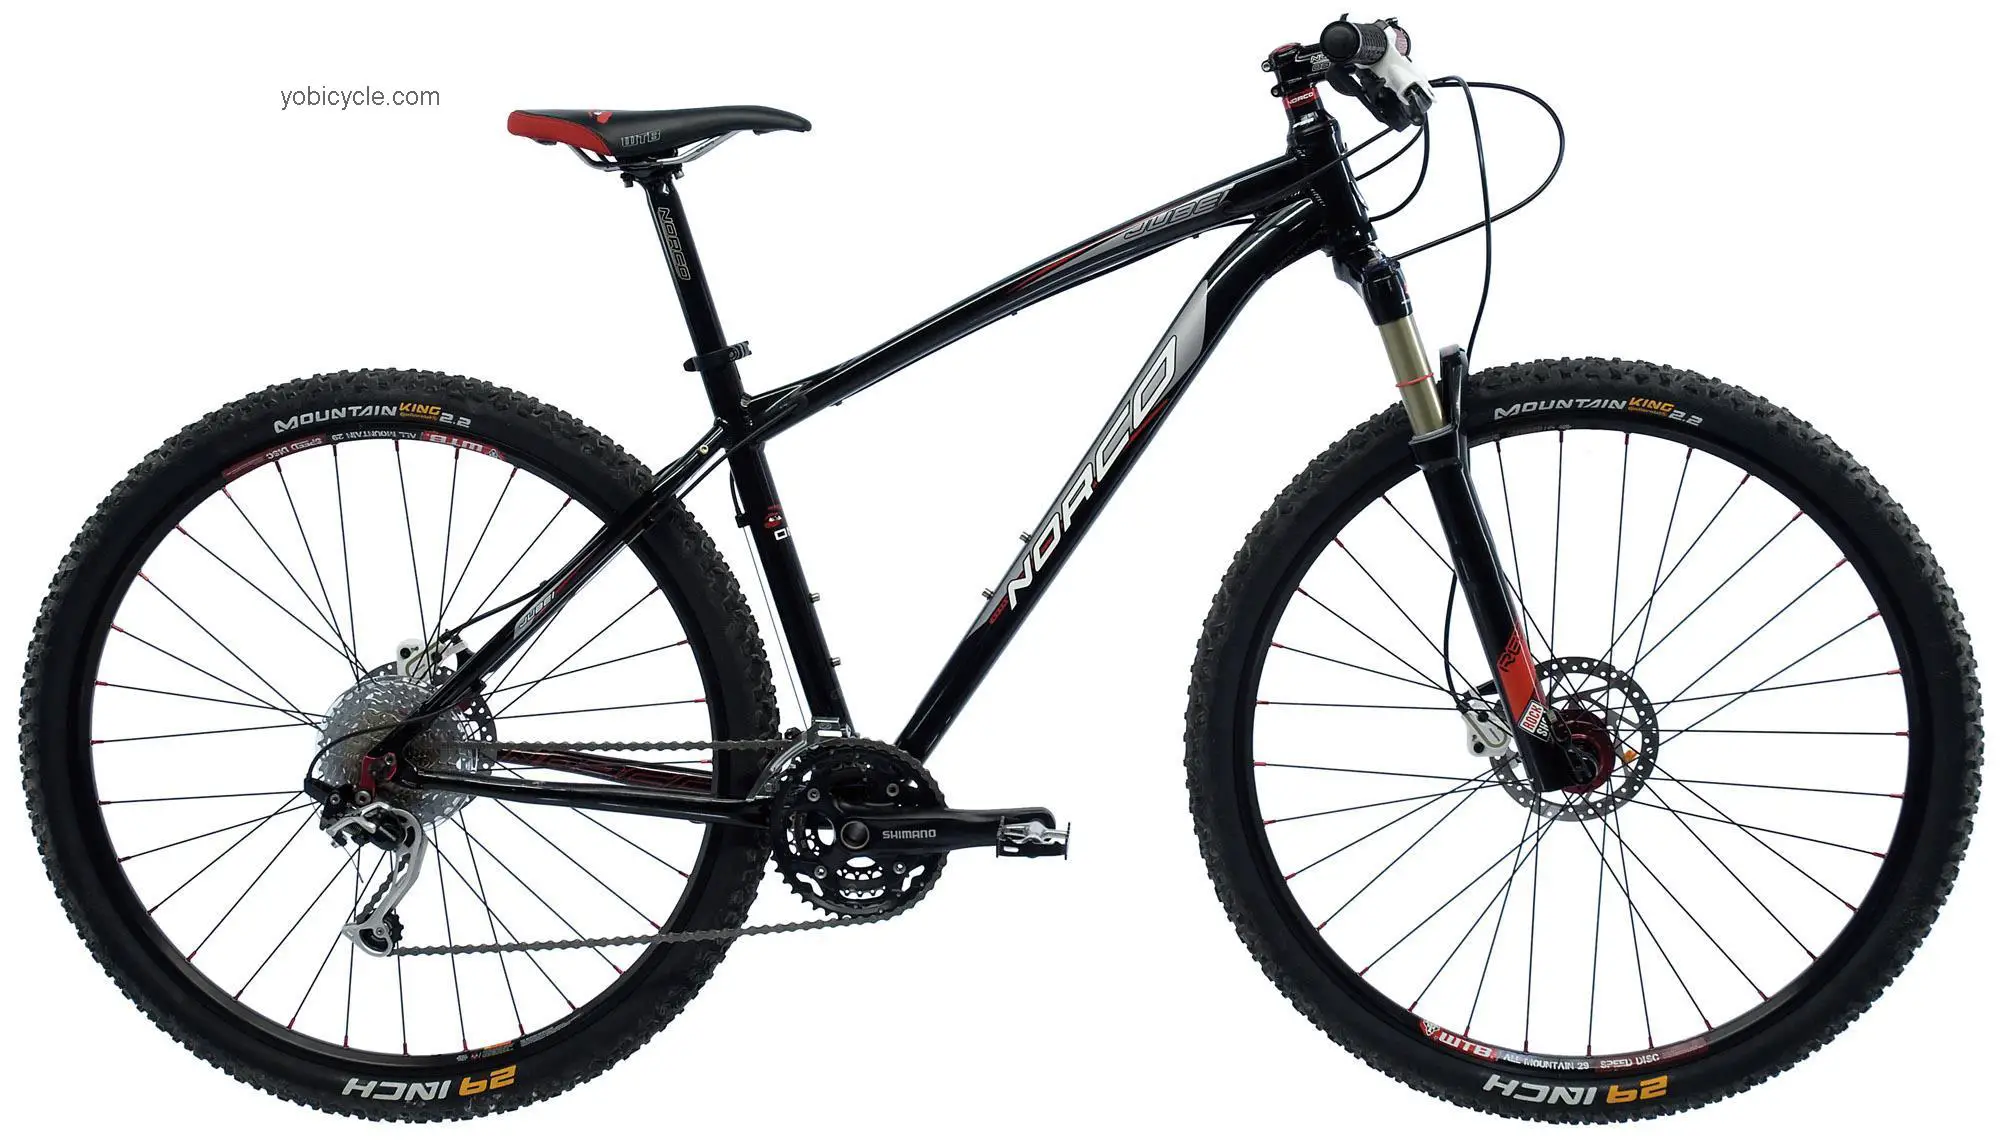 Norco Jubei 1 2011 comparison online with competitors